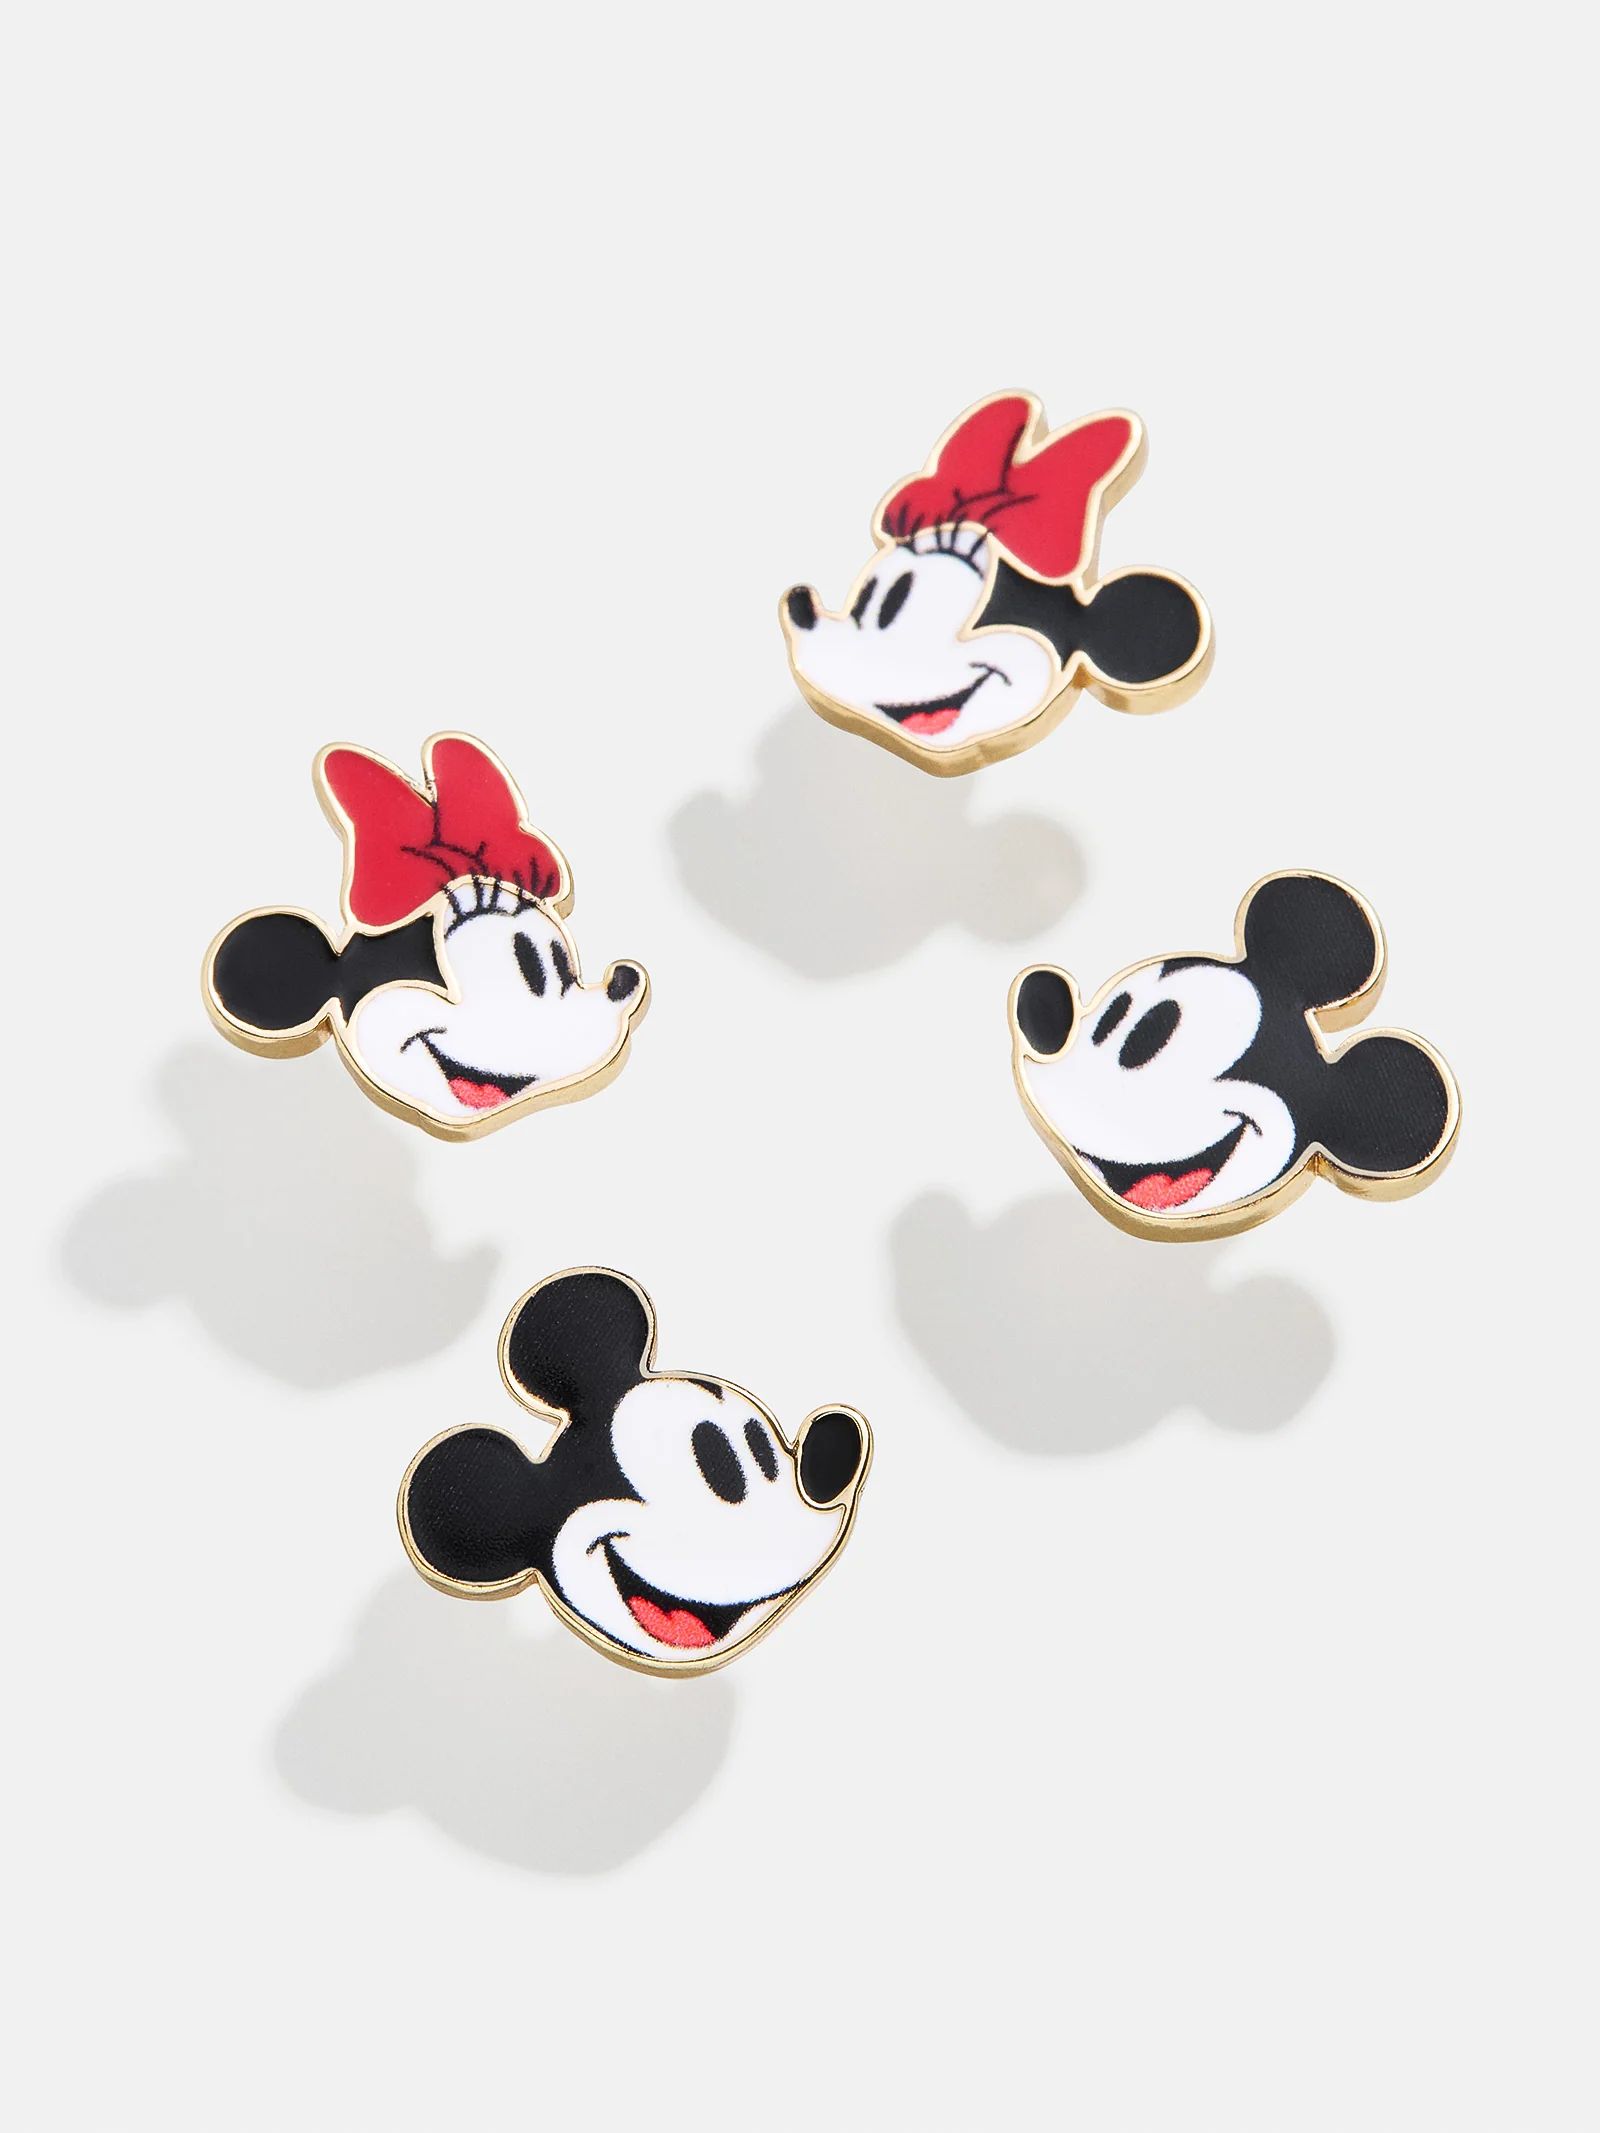 Mickey Mouse & Minnie Mouse Classic Earring Set - Red/White | BaubleBar (US)